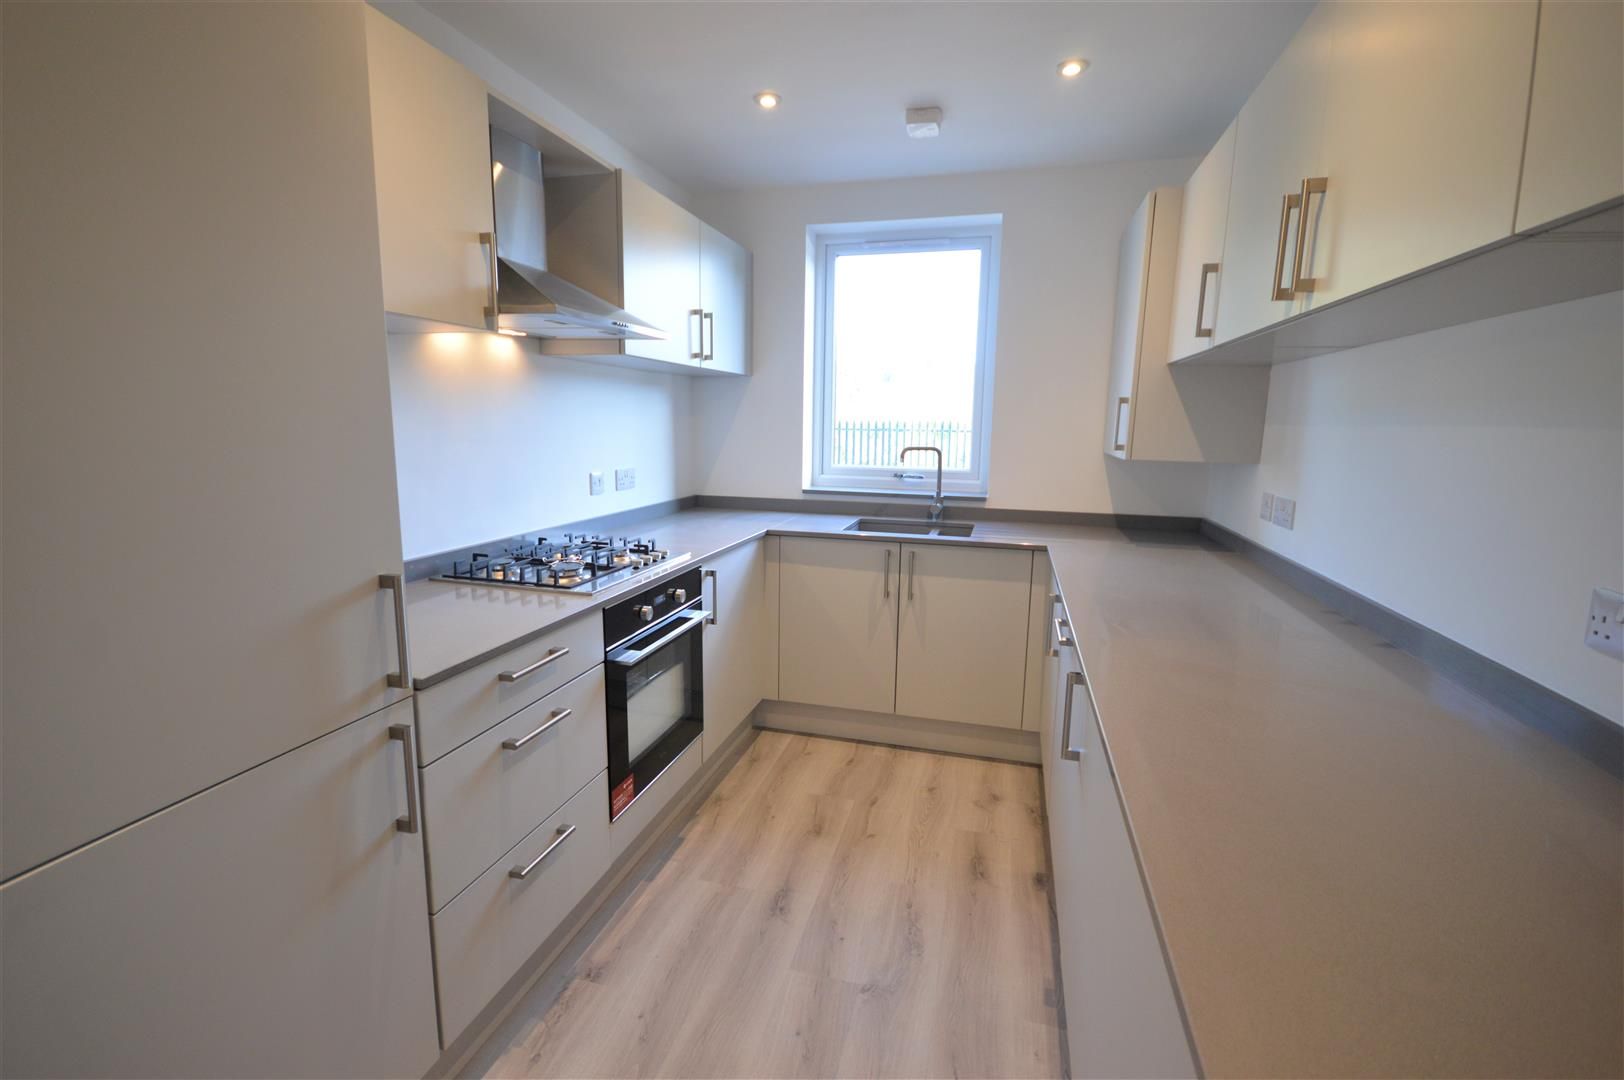 2 bed terraced for sale in Leominster  - Property Image 4